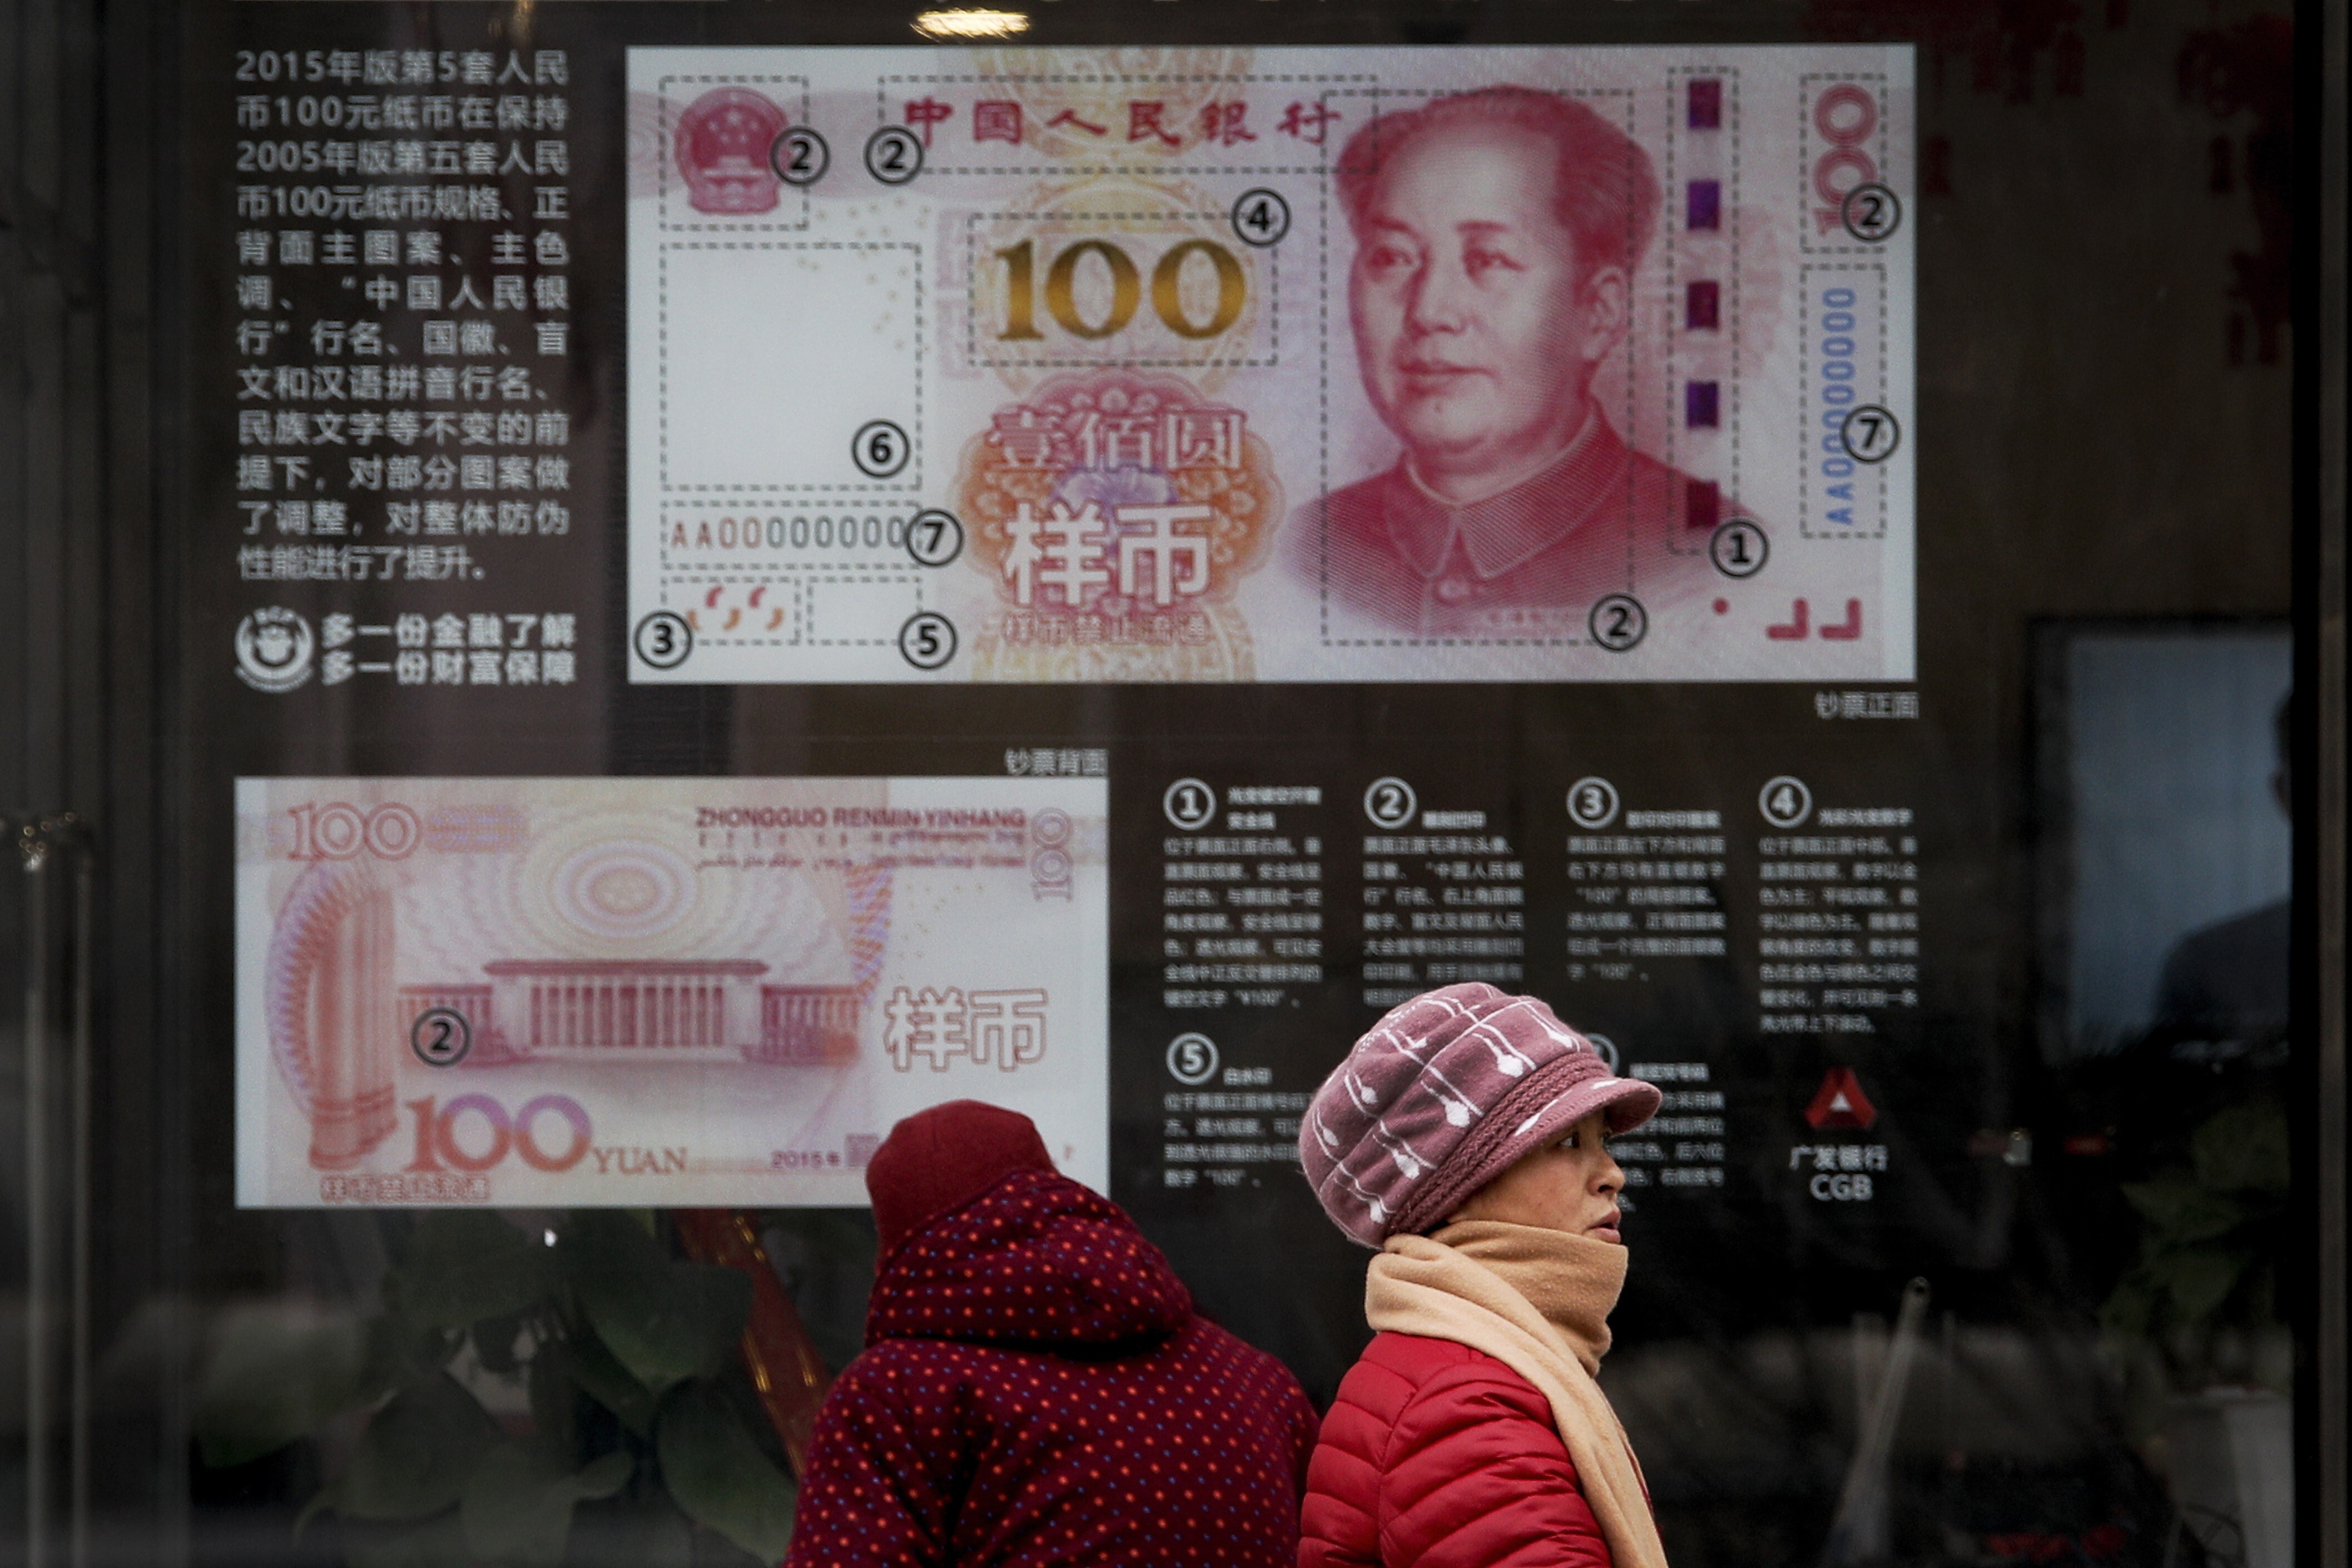 A women walks past a bank window displaying the security markers on the 100 yuan note, in Beijing, in February 2019. Photo: AP